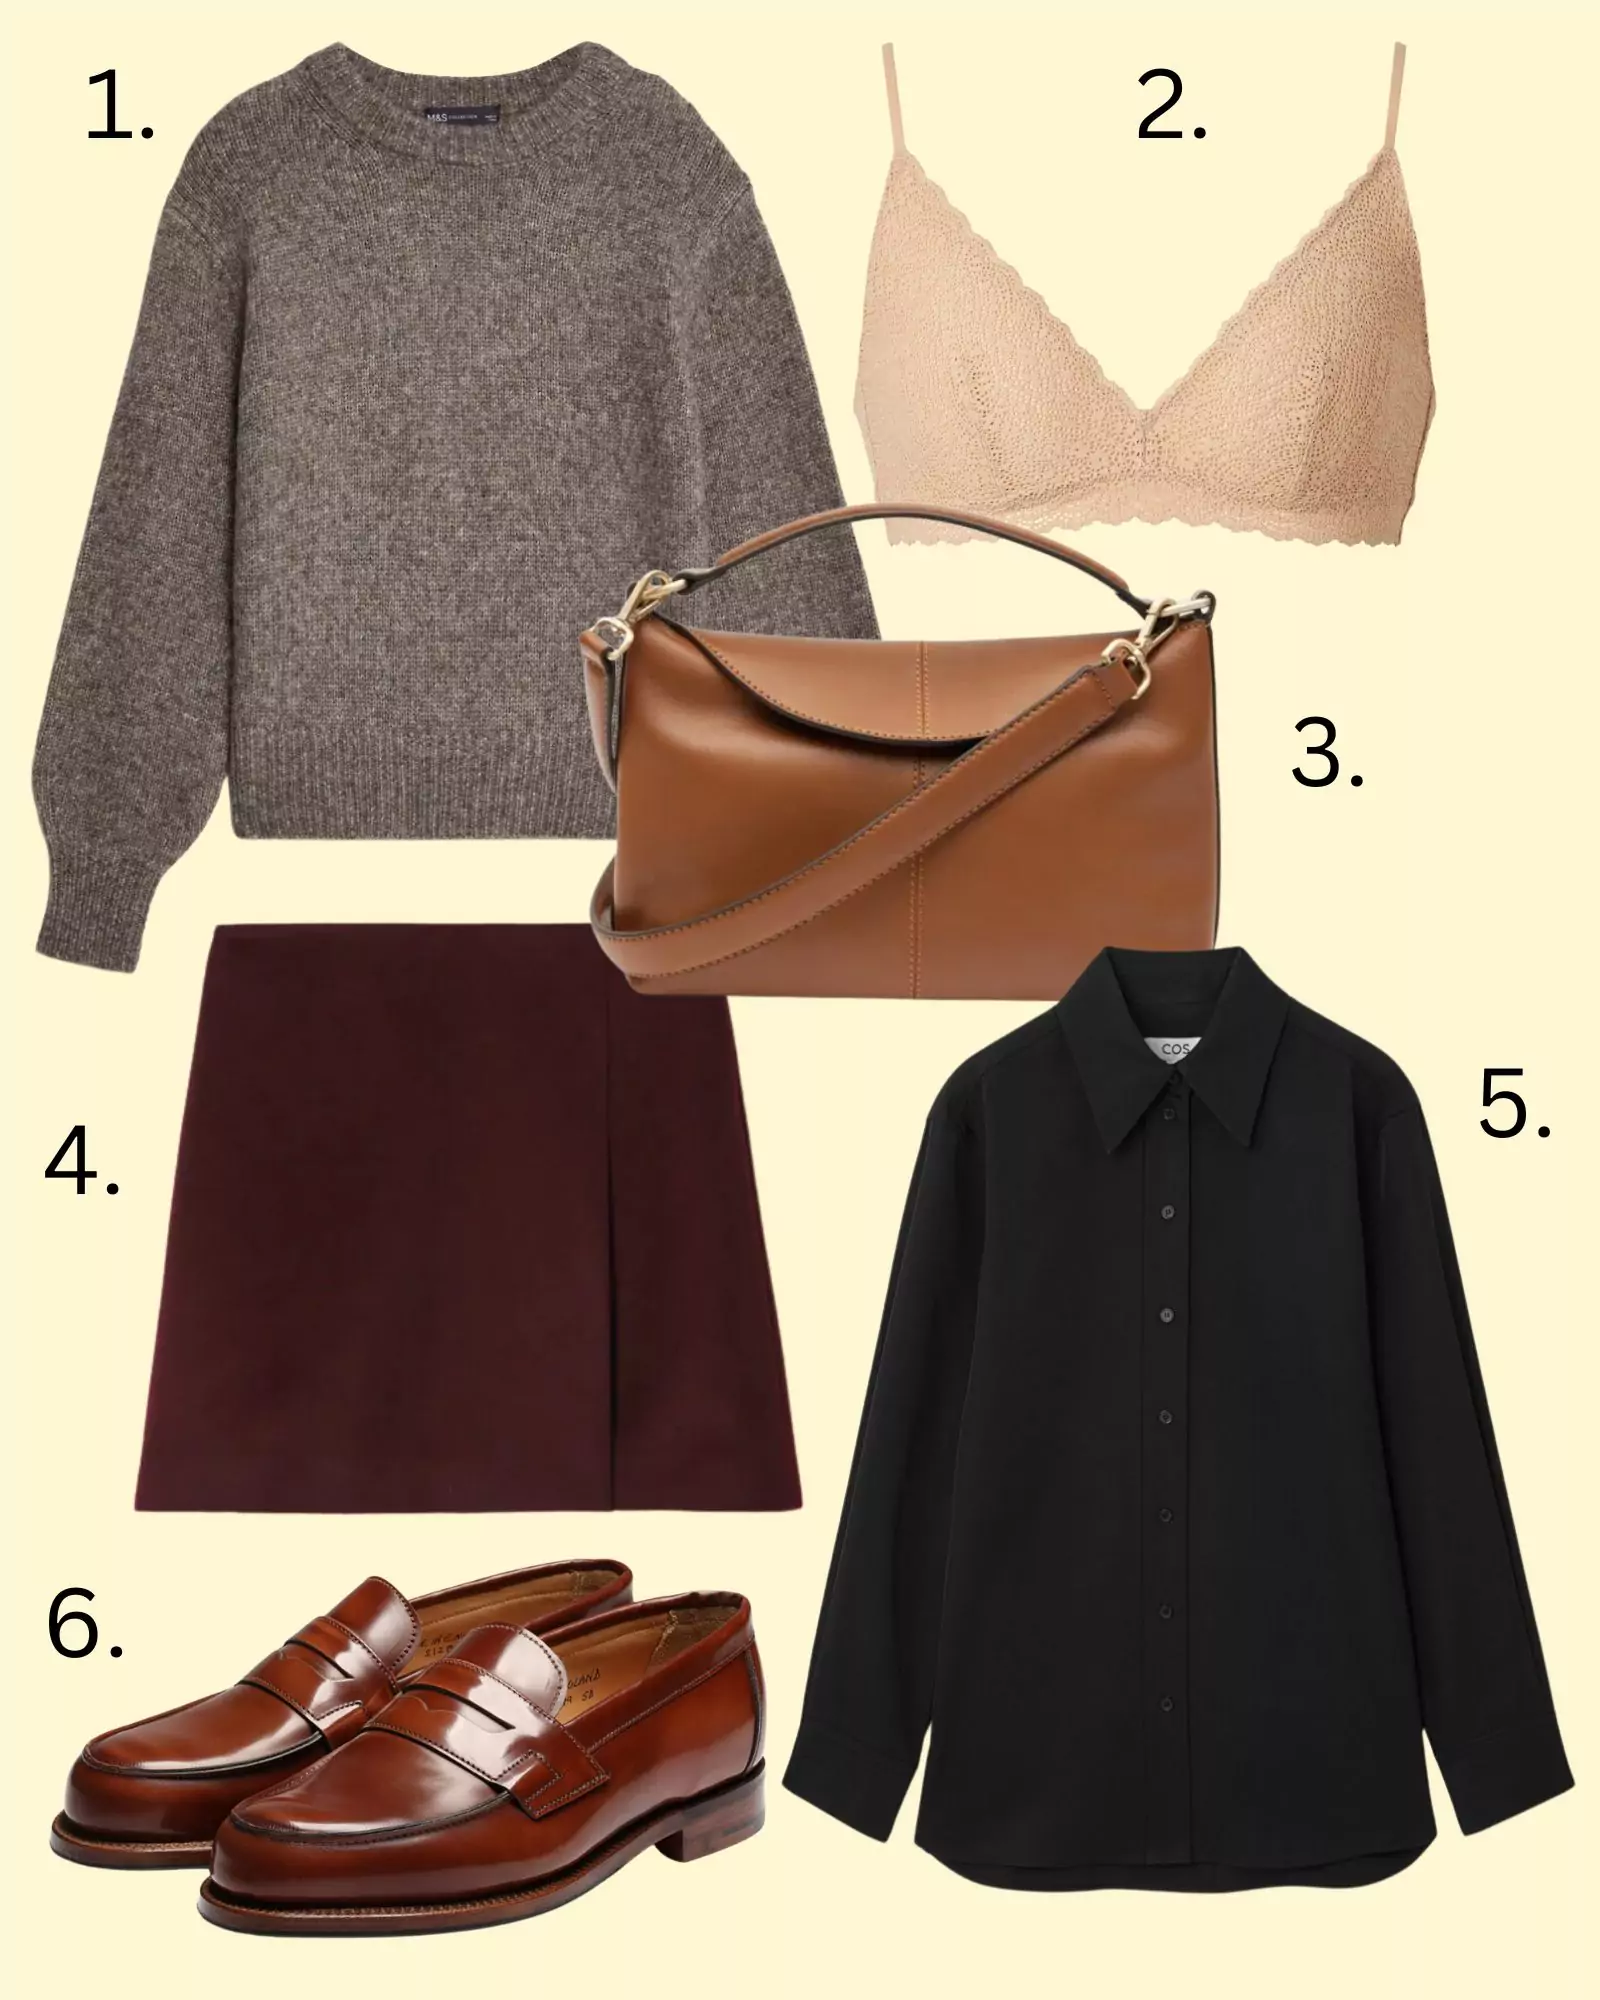 7 outfit ideas for February